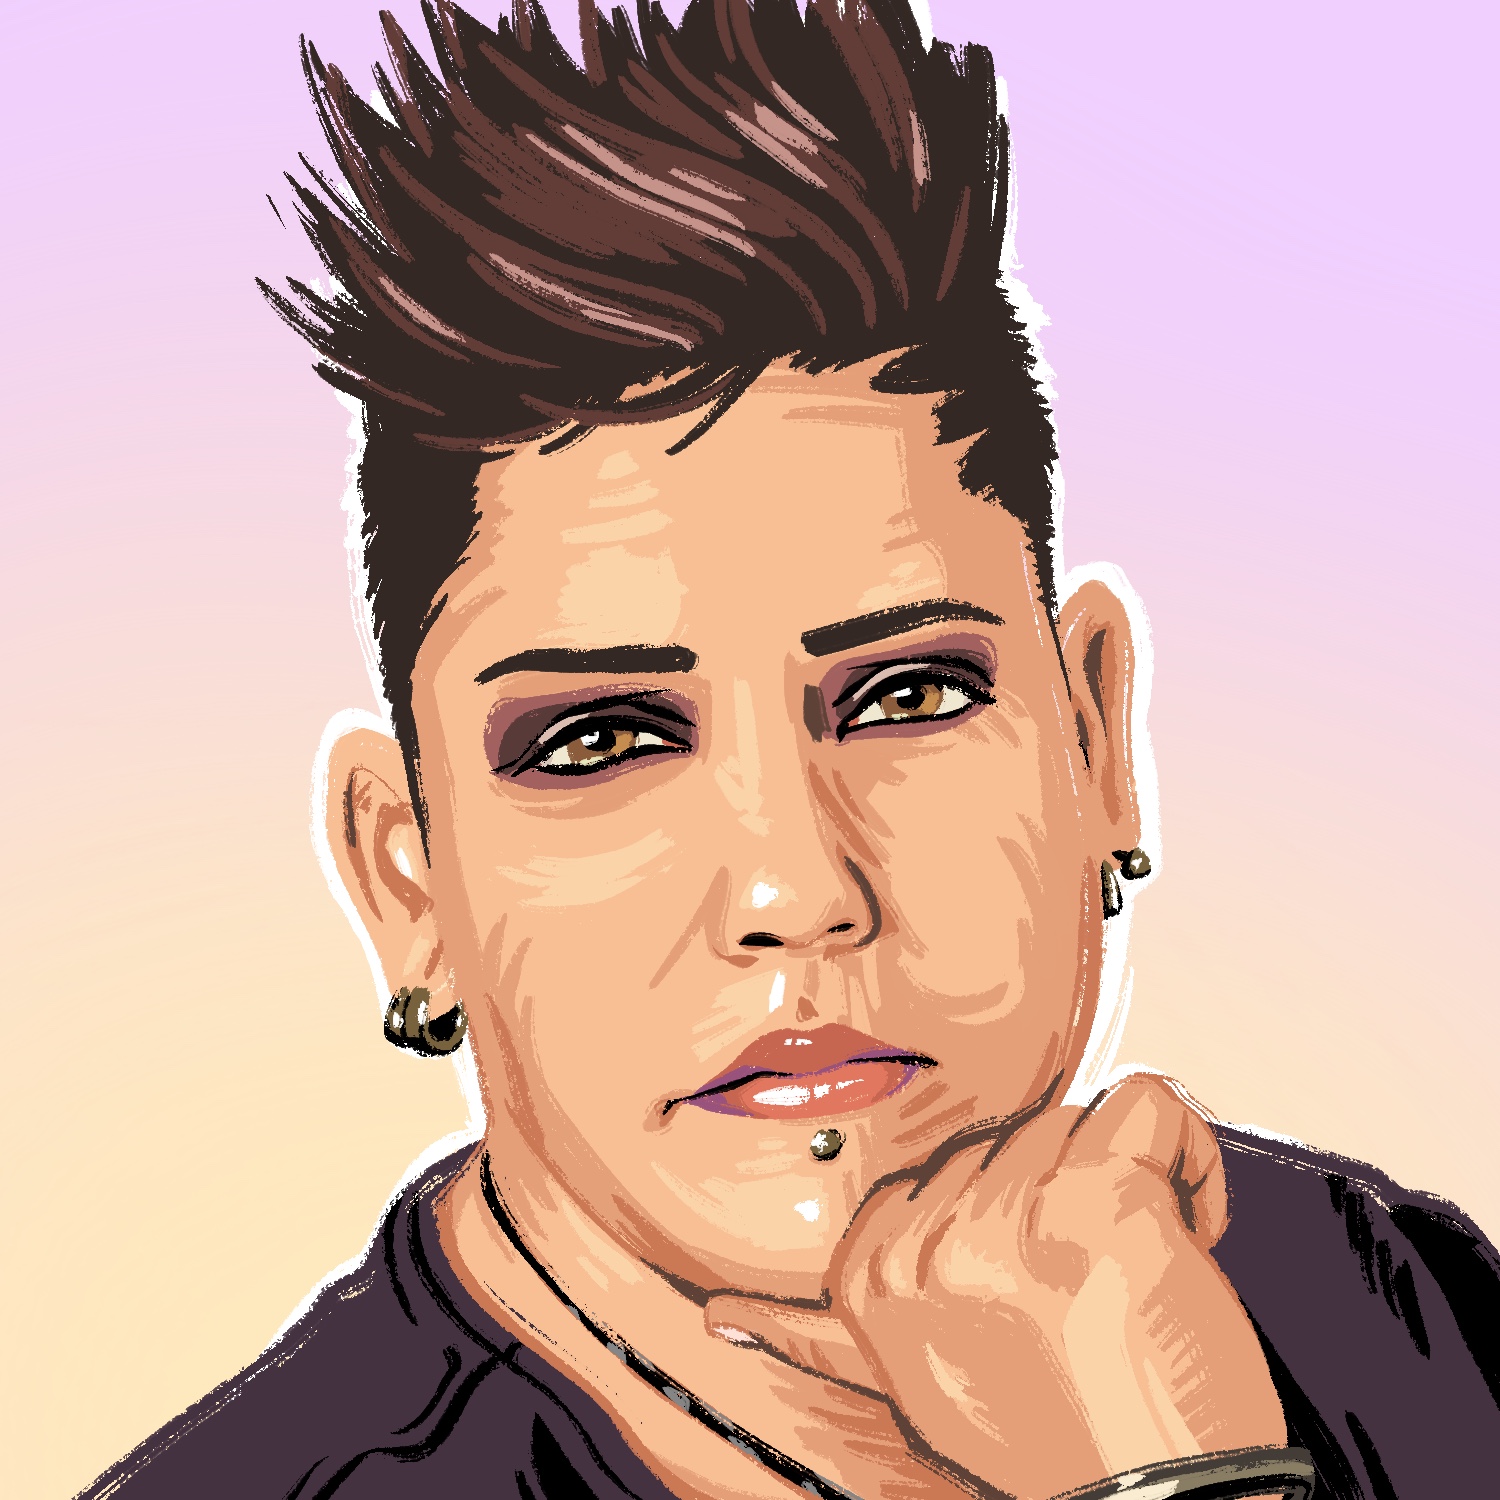 An illustration of a woman with a medium complexion, short dark hair up in a spikey do, and brown eyes. She is frowning slightly but her mouth looks almost like it might smile. Her head is resting on her hand and is looking directly at the viewer. She has on a dark top and the background is a light purple that fades to a faint gold at the bottom.